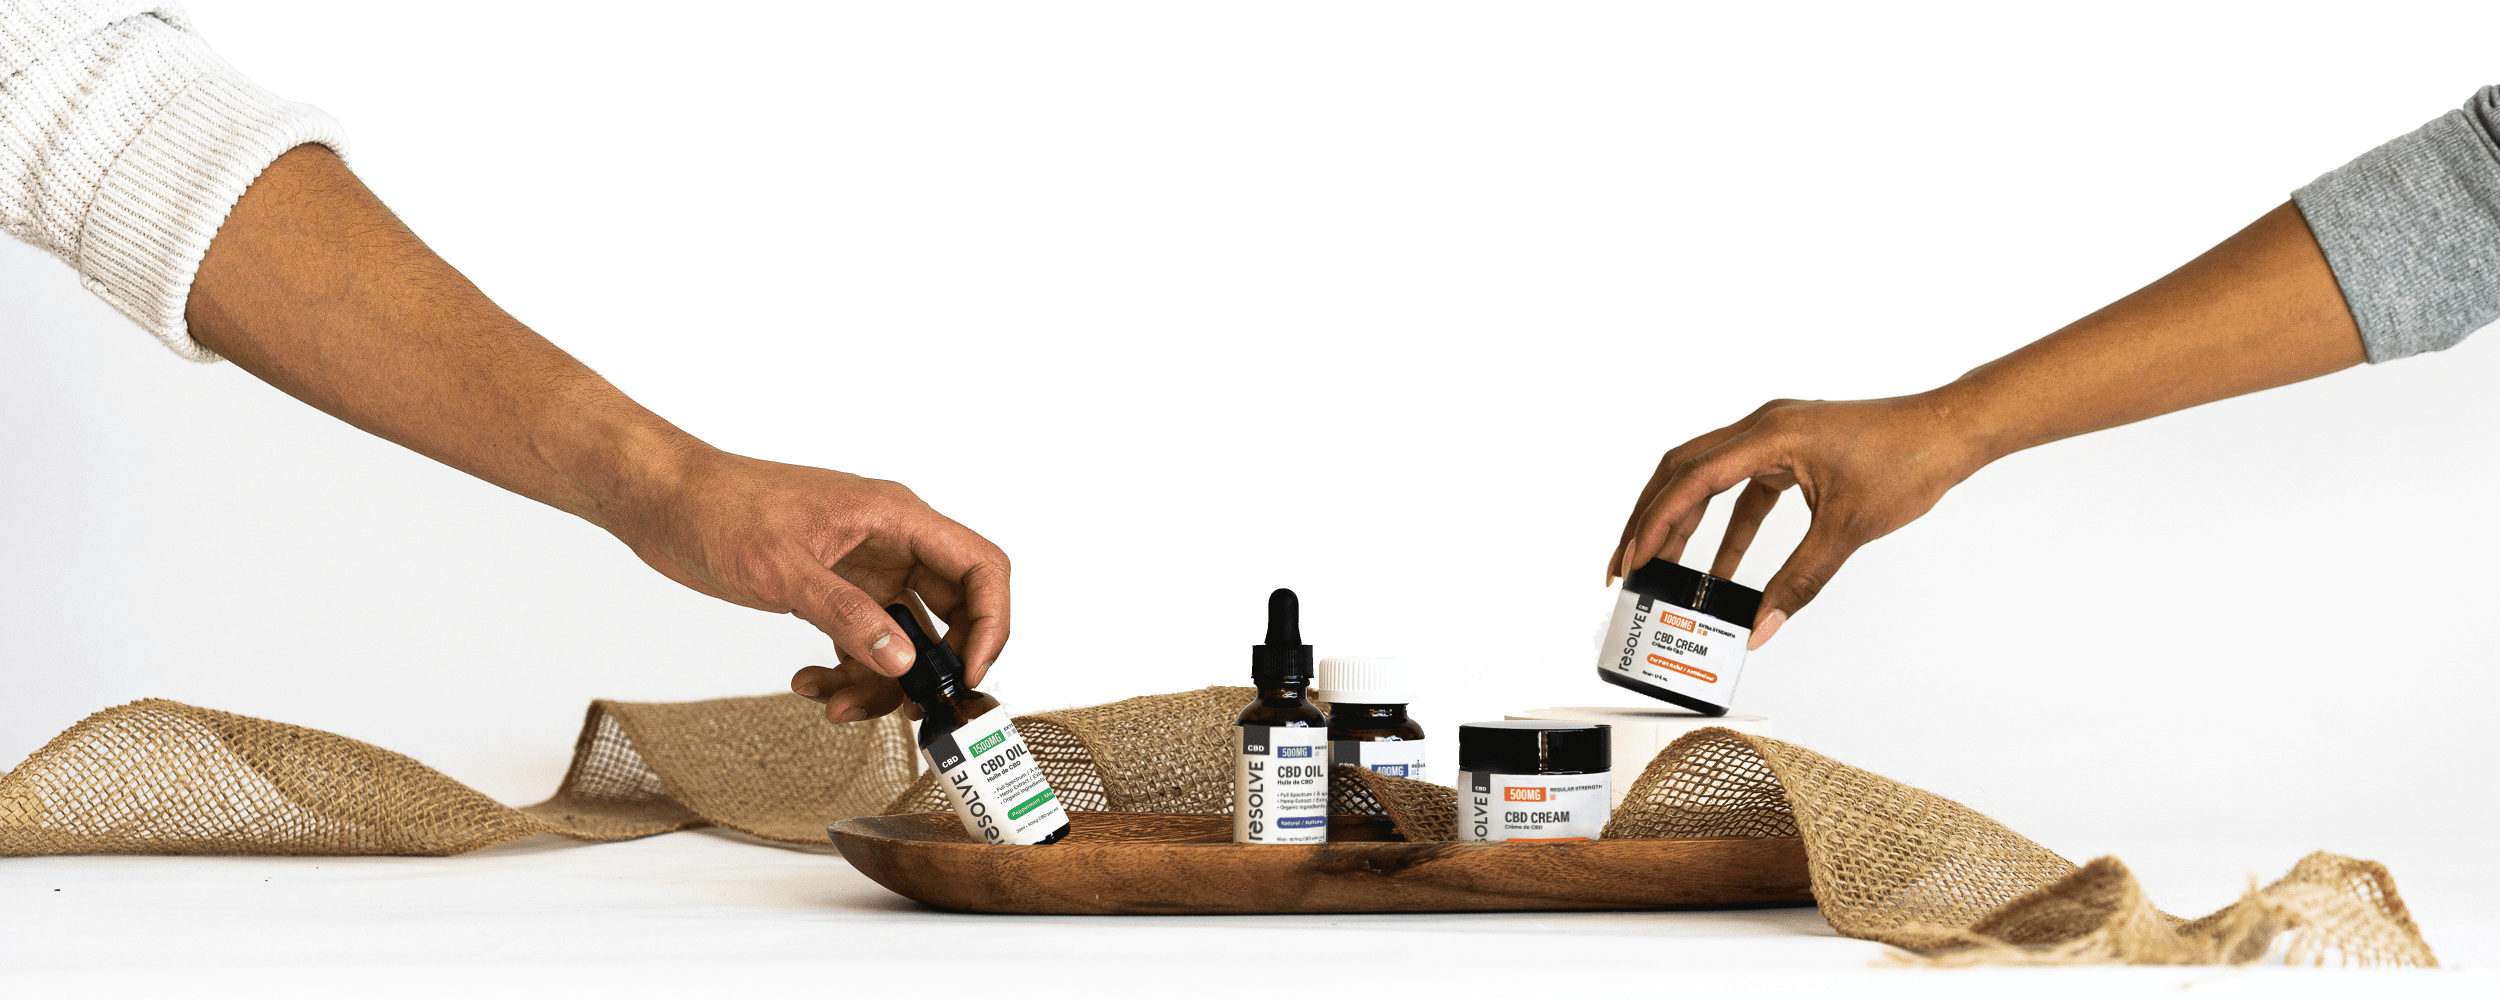 Hands reaching for resolveCBD products